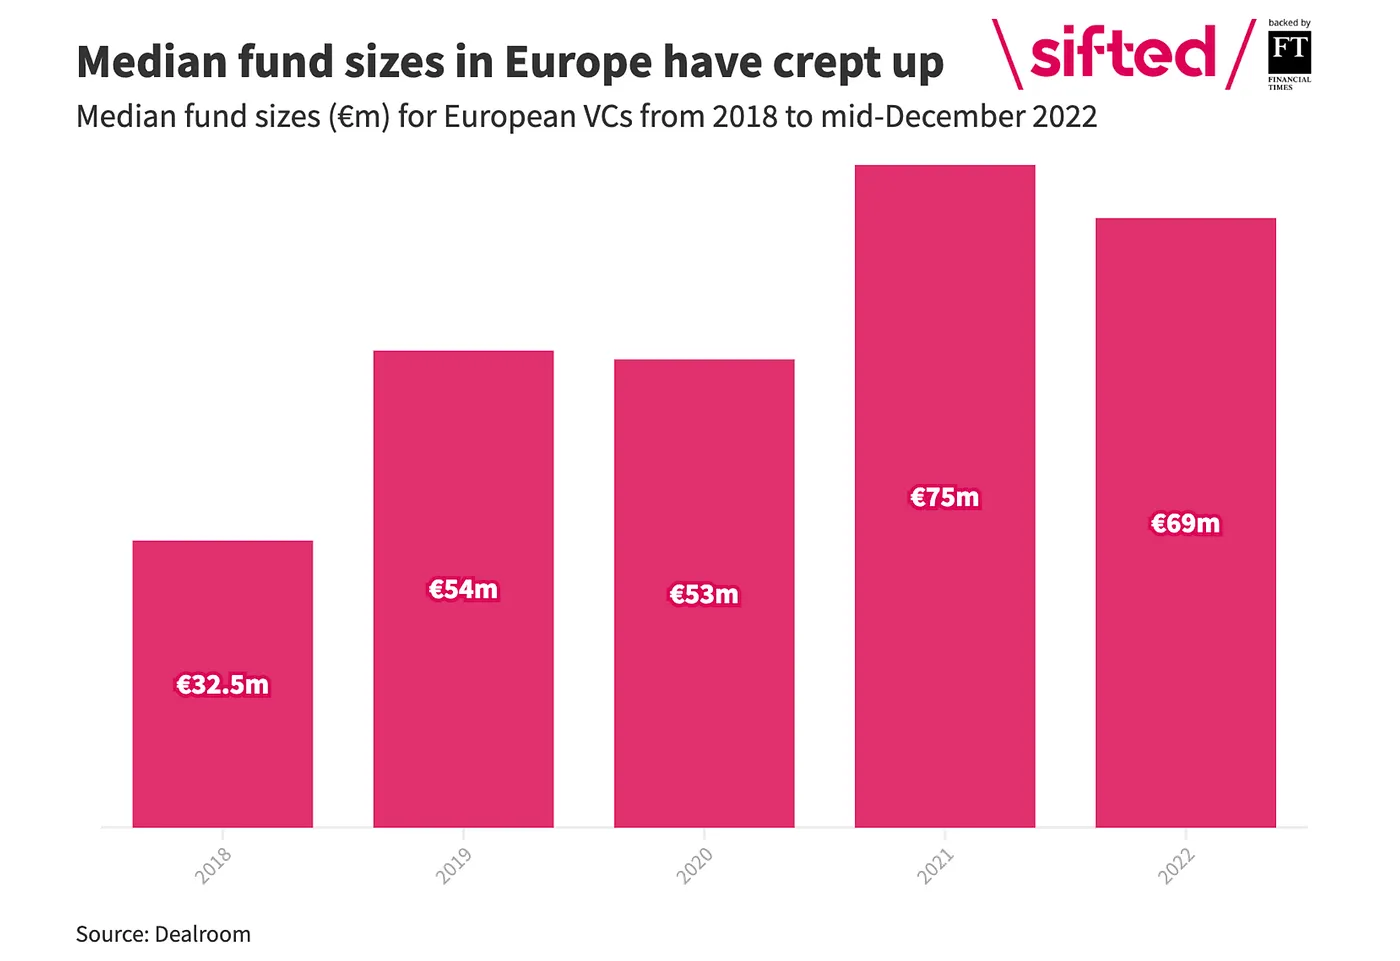 source: https://sifted.eu/articles/vc-fund-size-too-big/